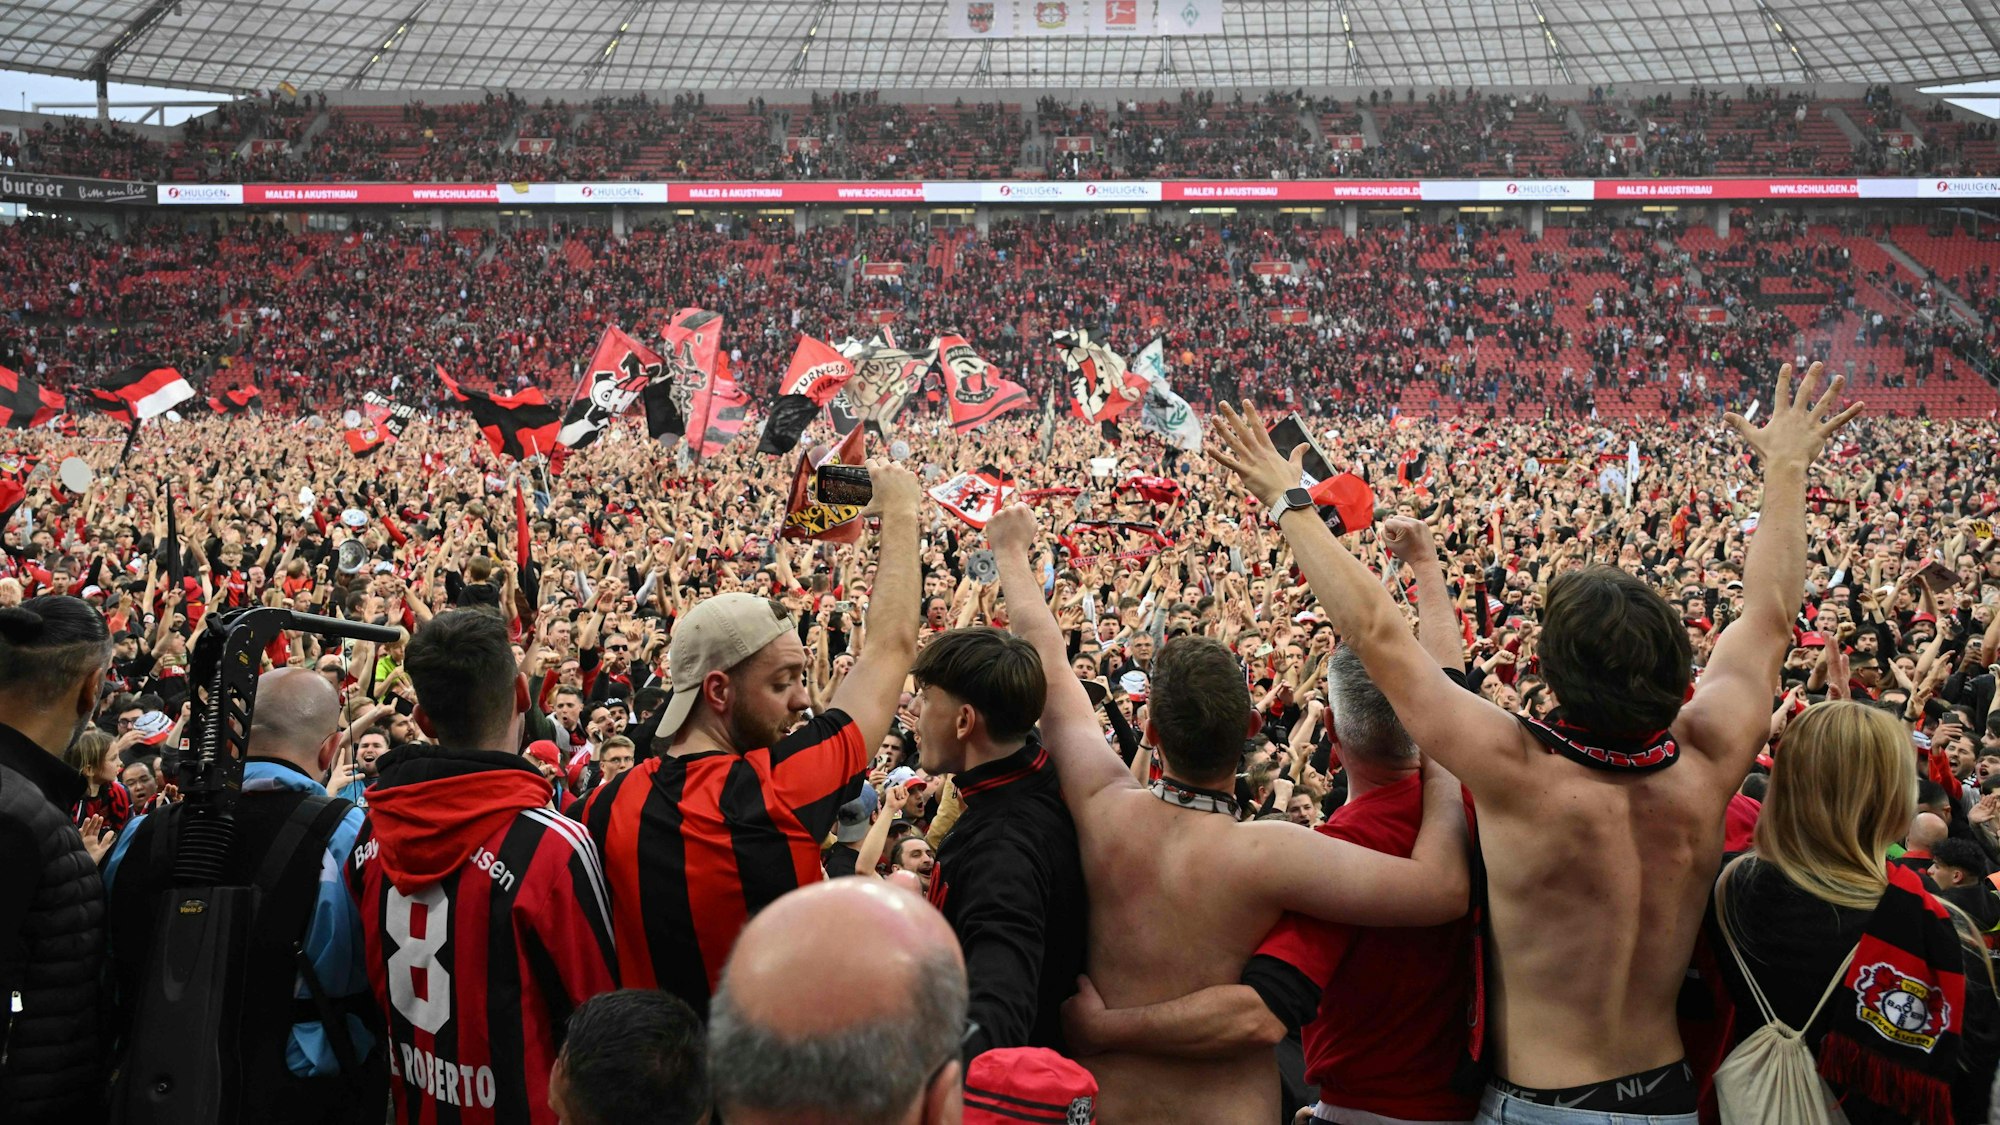 Leverkusen fans celebrate on the pitch after the German first division Bundesliga football match Bayer 04 Leverkusen v Werder Bremen in Leverkusen, western Germany, on April 14, 2024. Bayer Leverkusen were crowned 2023-24 Bundesliga champions for the first time on April 14, 2024.  (Photo by INA FASSBENDER / AFP) / DFL REGULATIONS PROHIBIT ANY USE OF PHOTOGRAPHS AS IMAGE SEQUENCES AND/OR QUASI-VIDEO